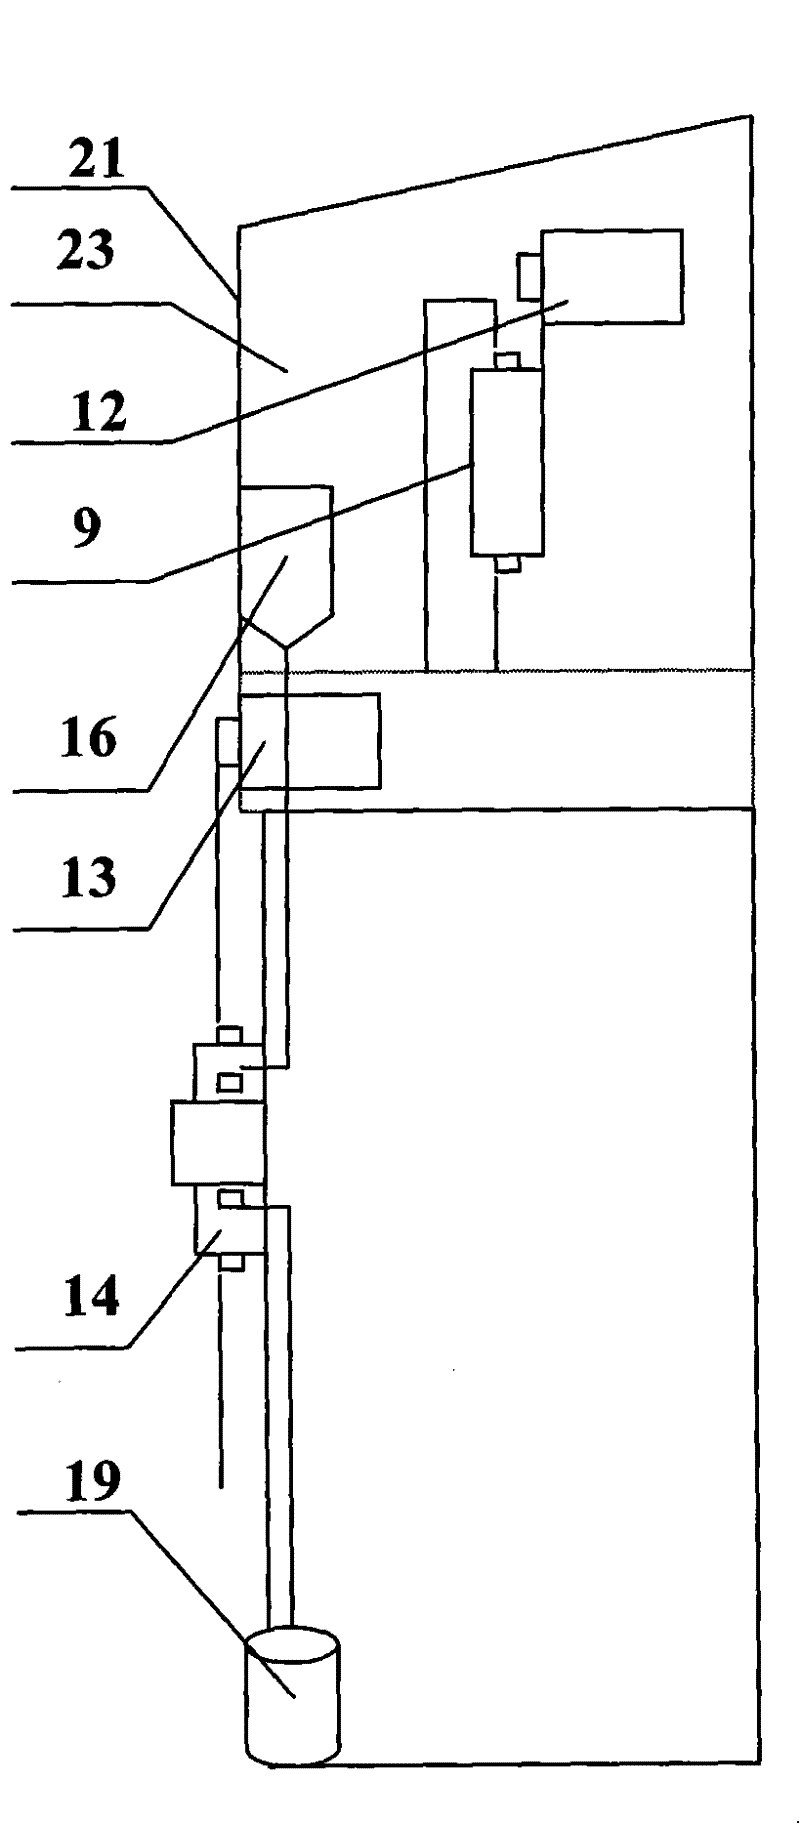 Mixed biology artificial liver vitro supporting device